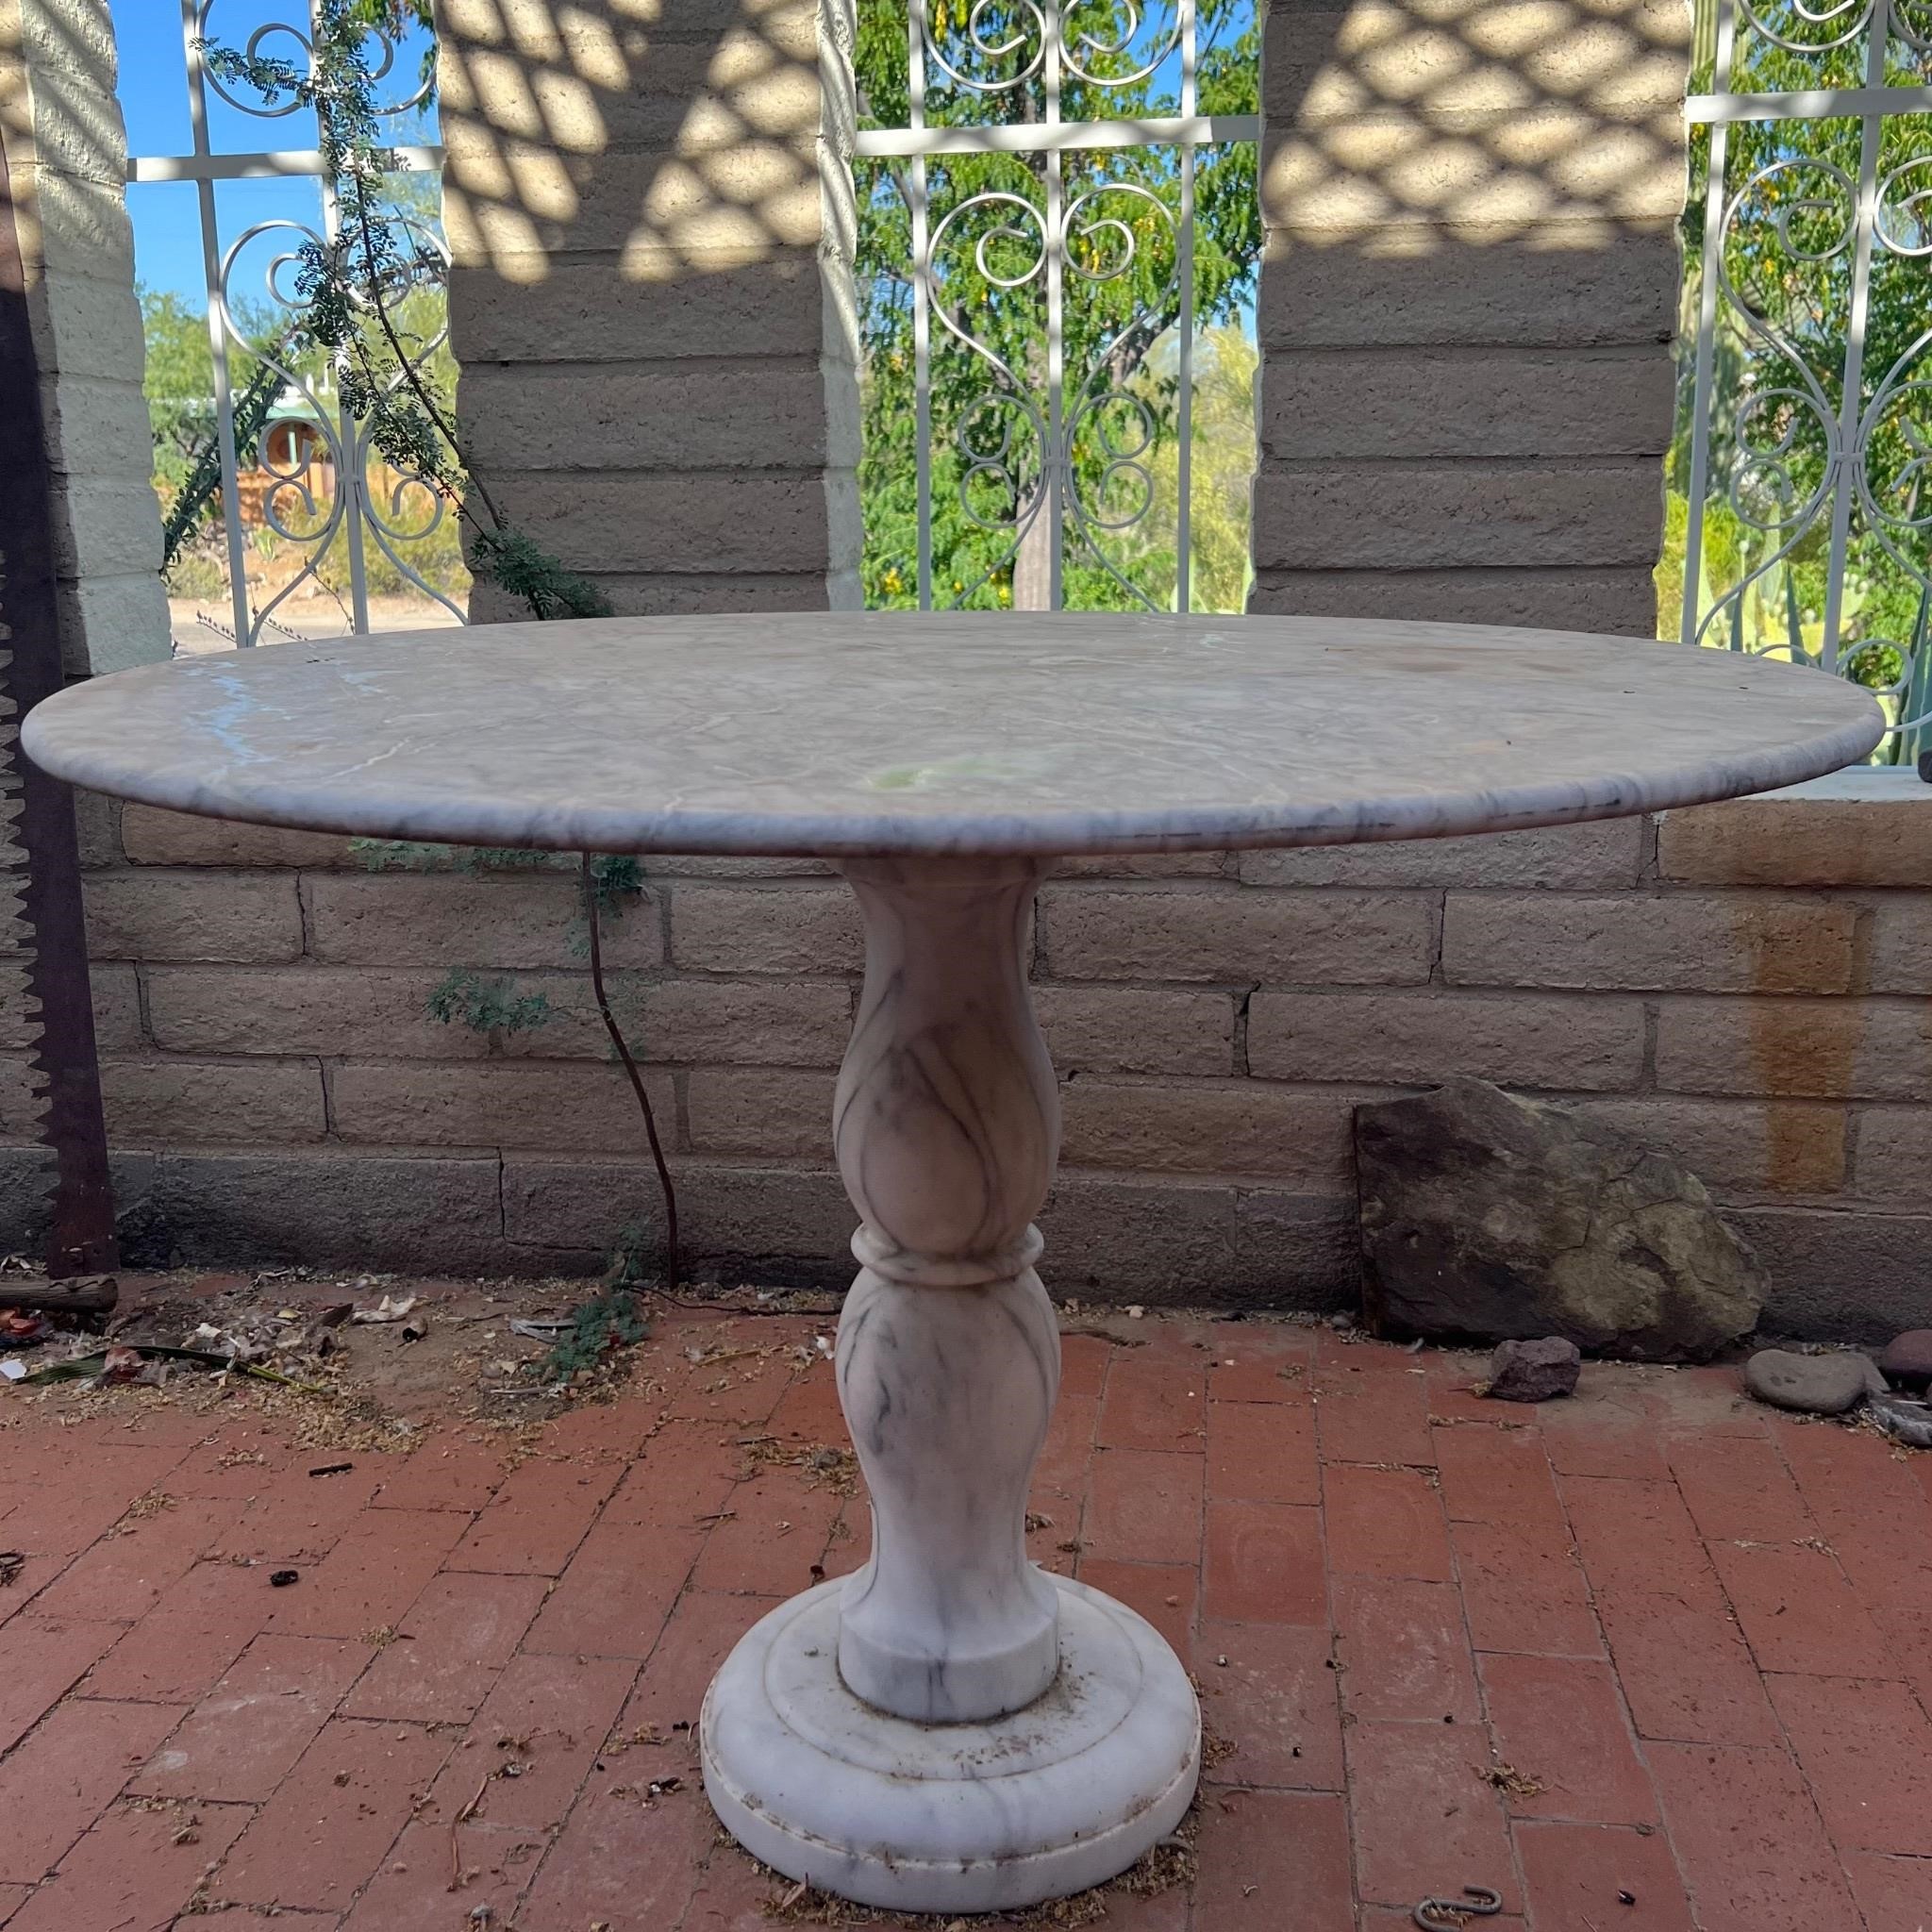 PossibleWhite Marble Table w Pestle